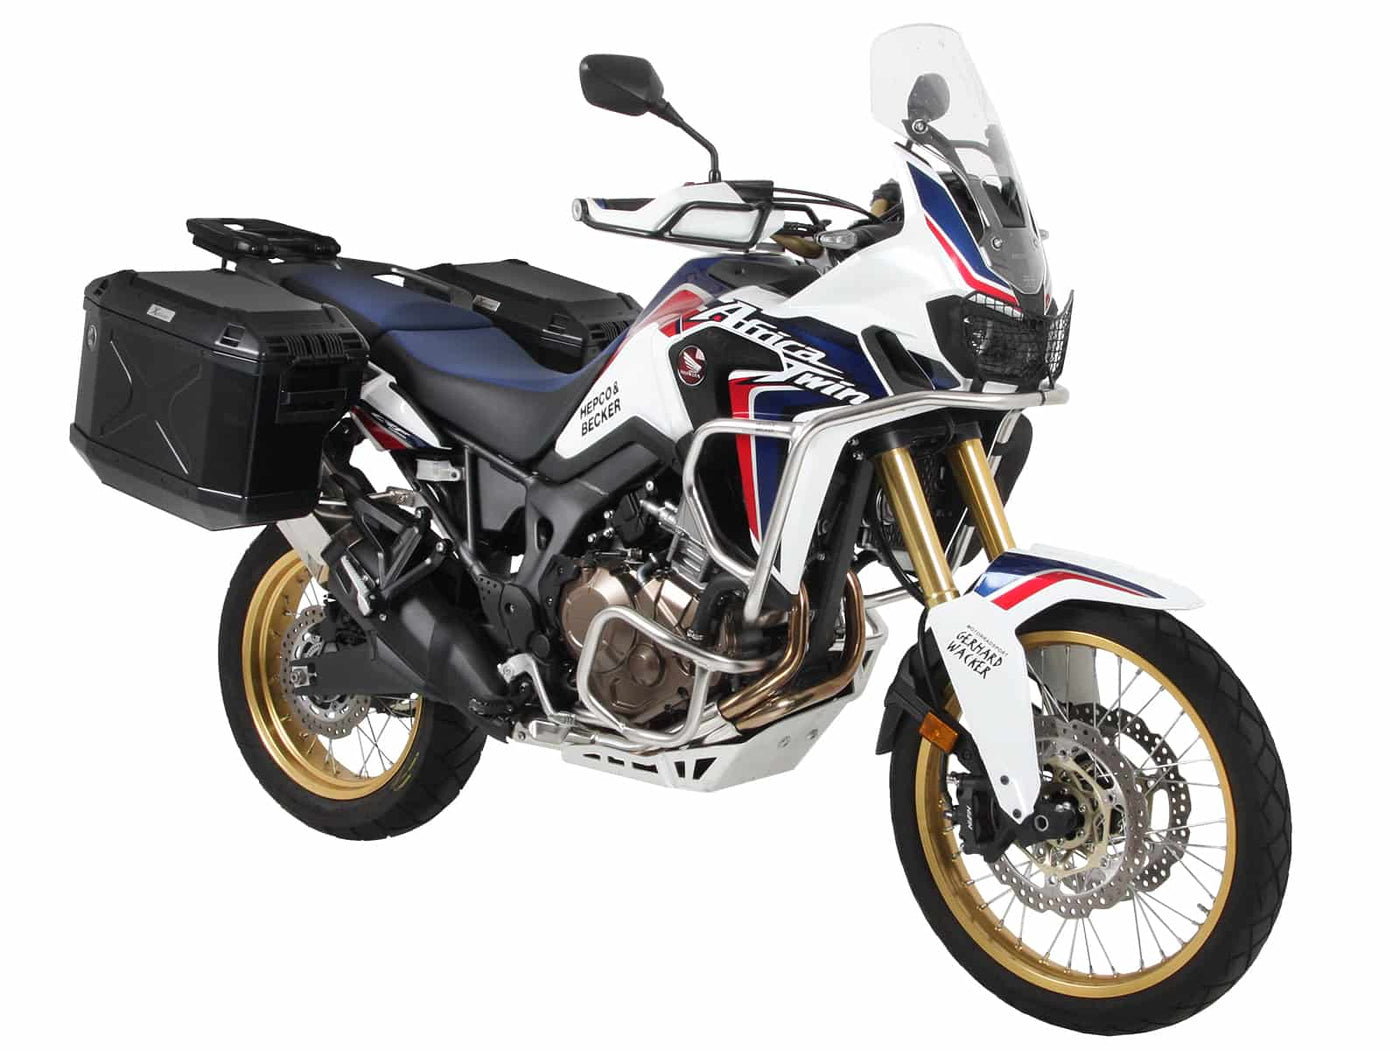 SideCarrier Cutout incl. XPLORER Silver Sideboxes for HONDA CRF 1000 L Africa Twin (2016-2017)